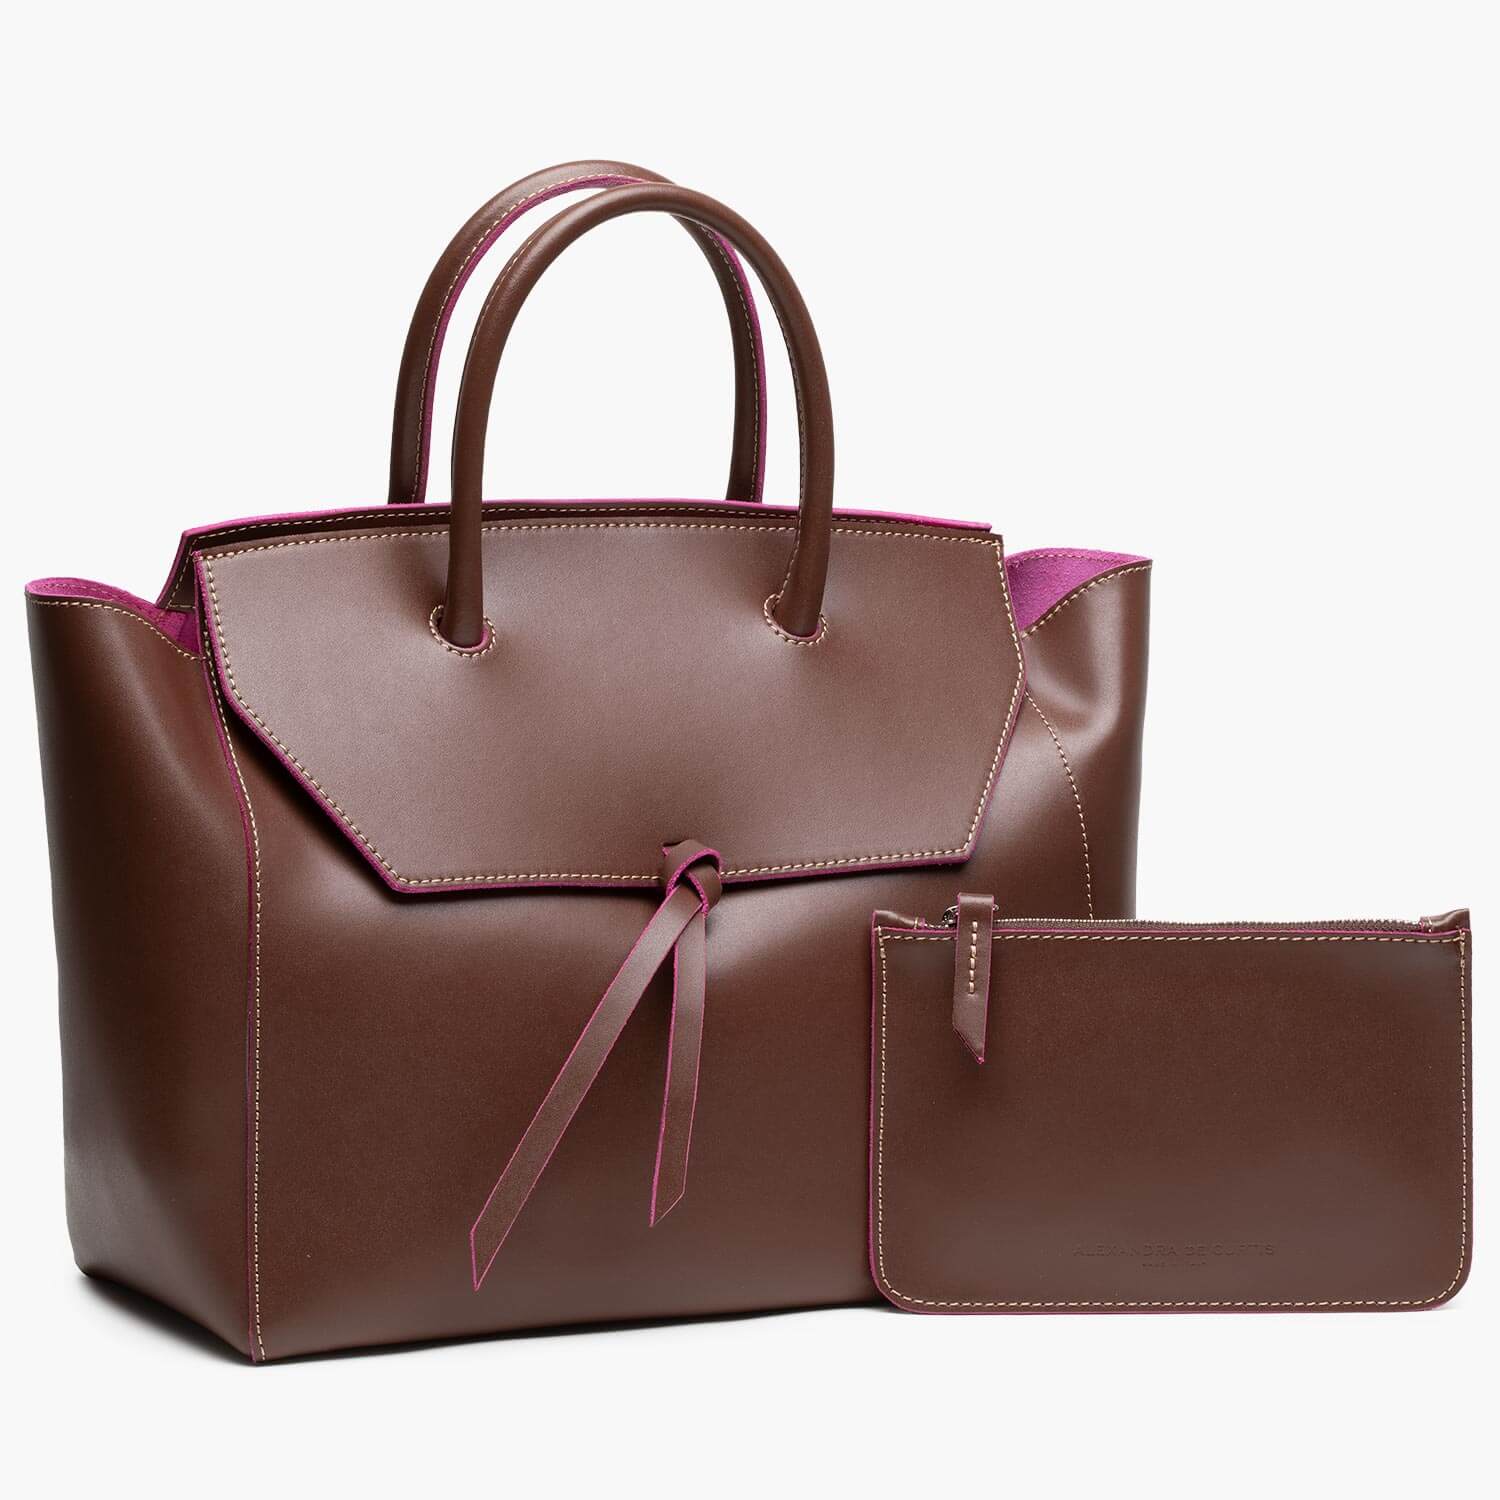 Tote Leather Bag in Dark Burgundy Brown. Leather Shopper in 